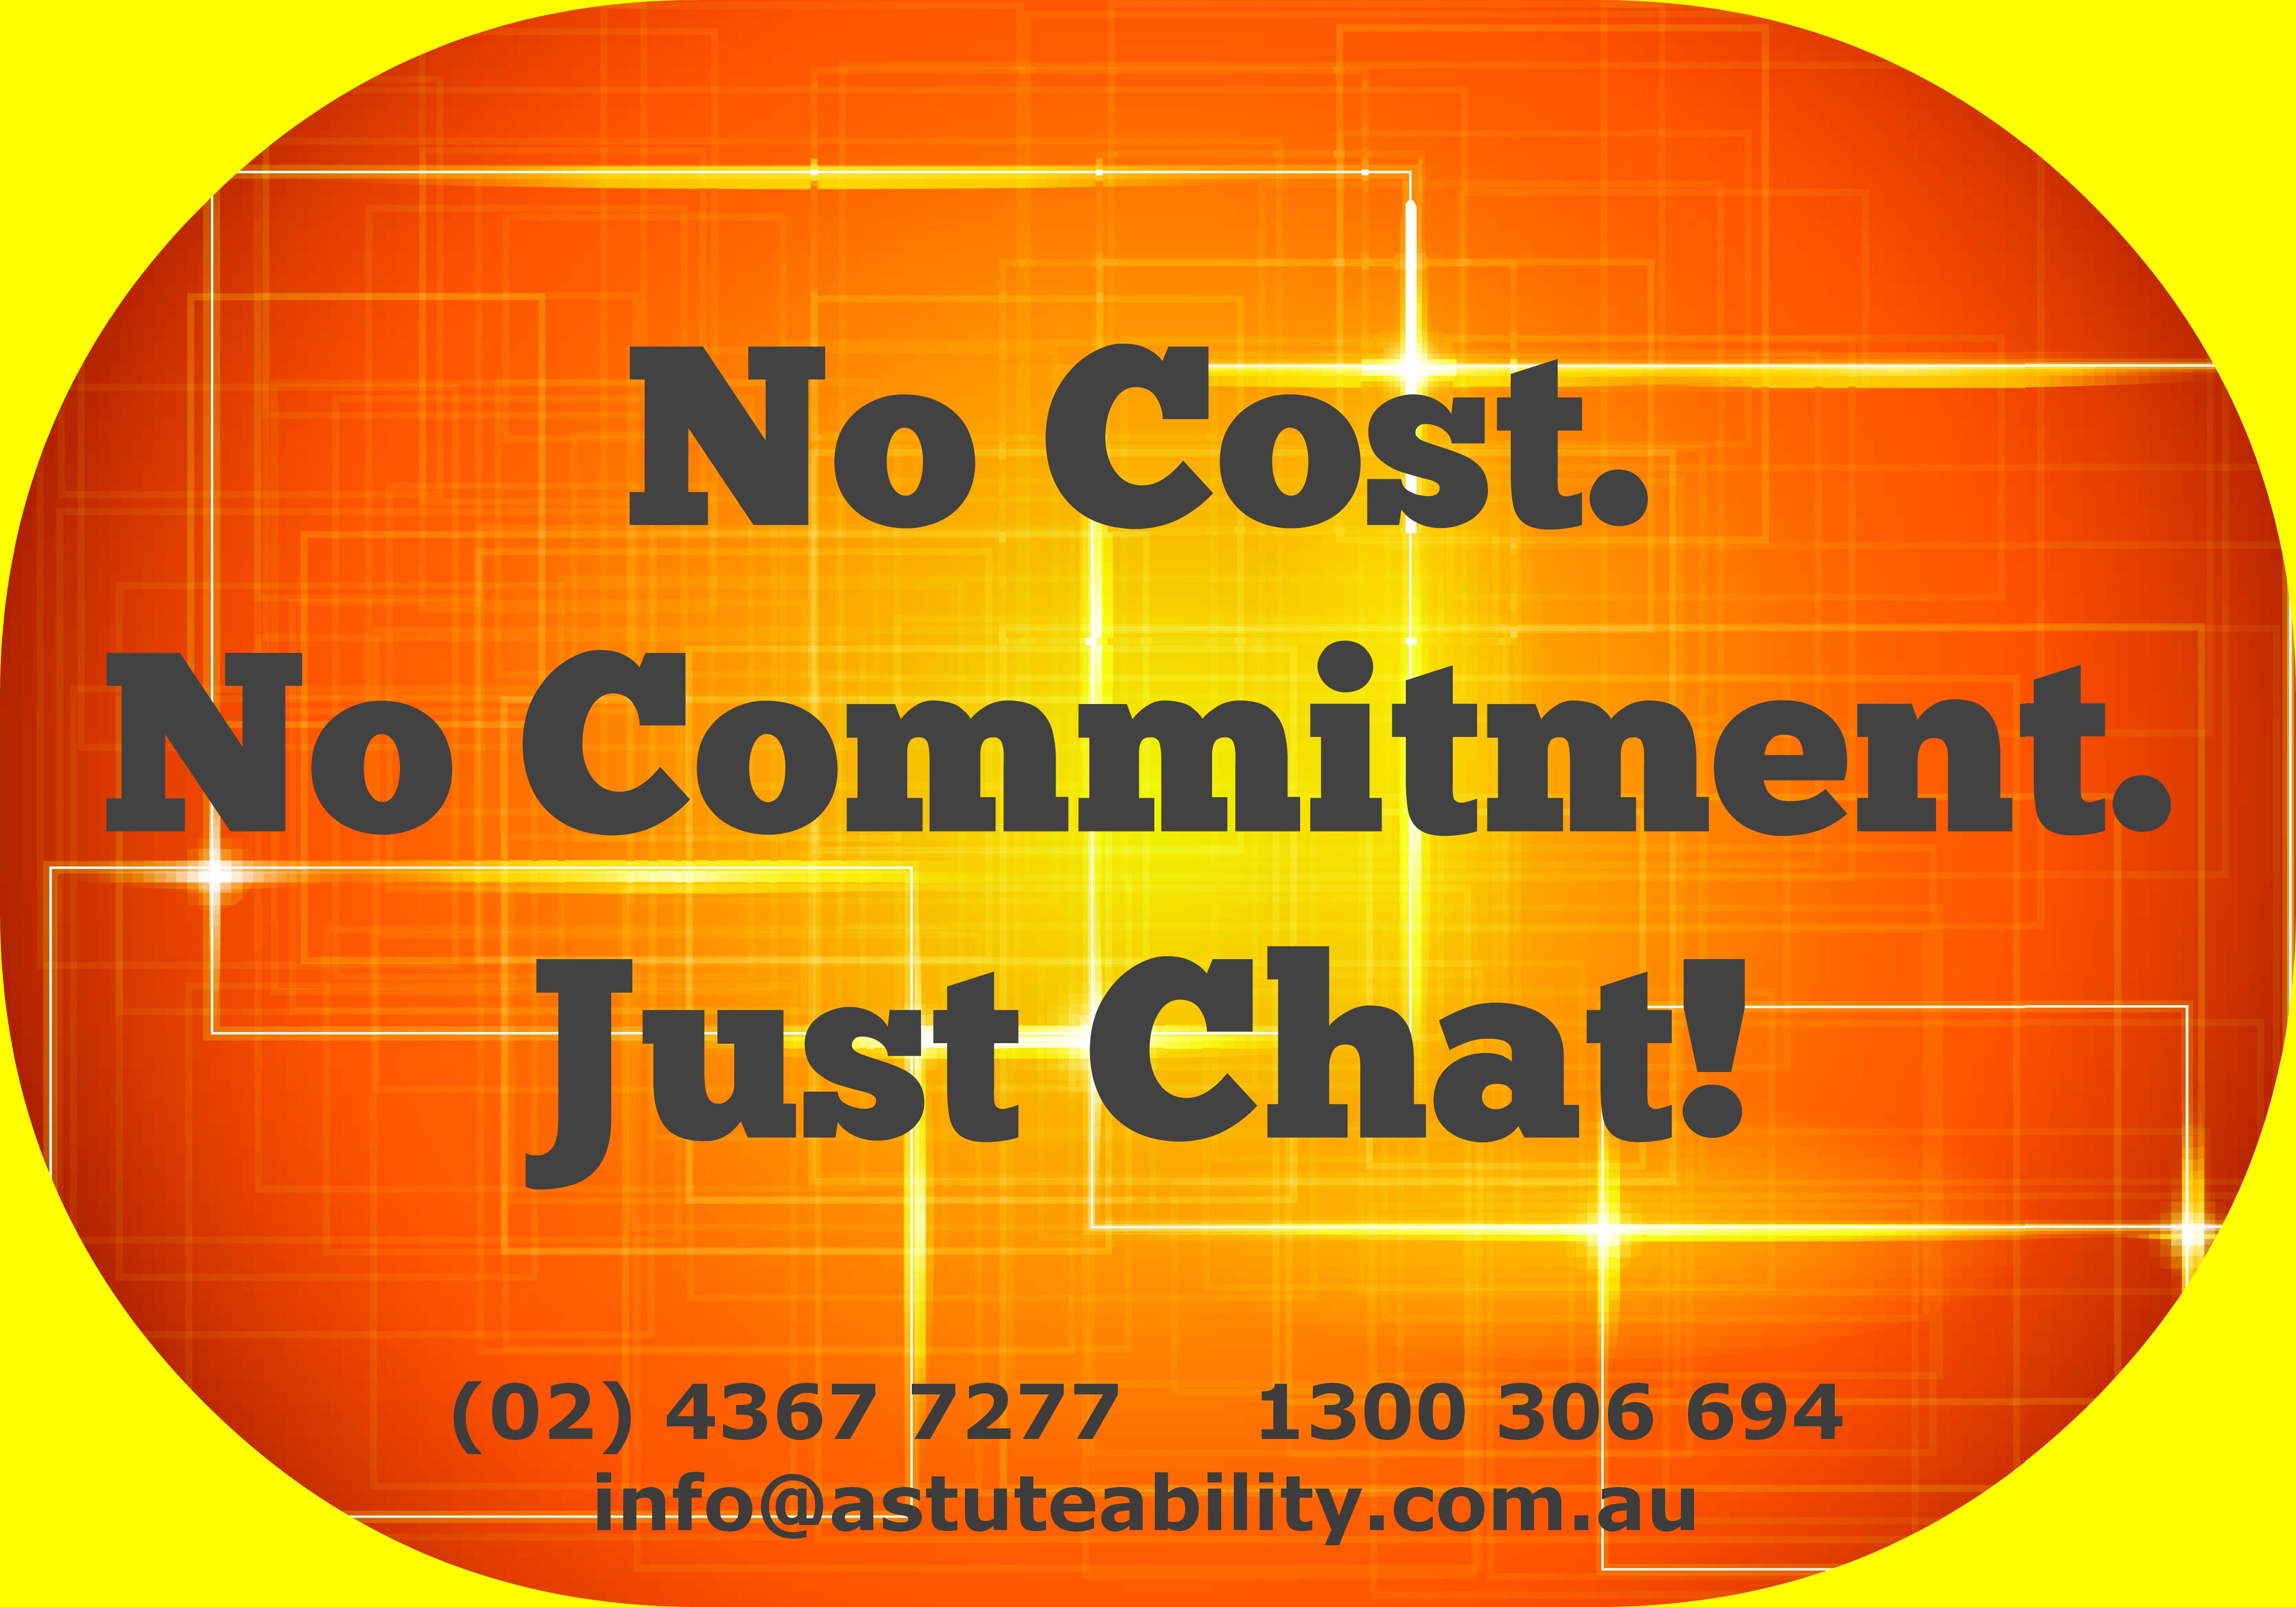 No Cost. No Commitment. Just Chat!